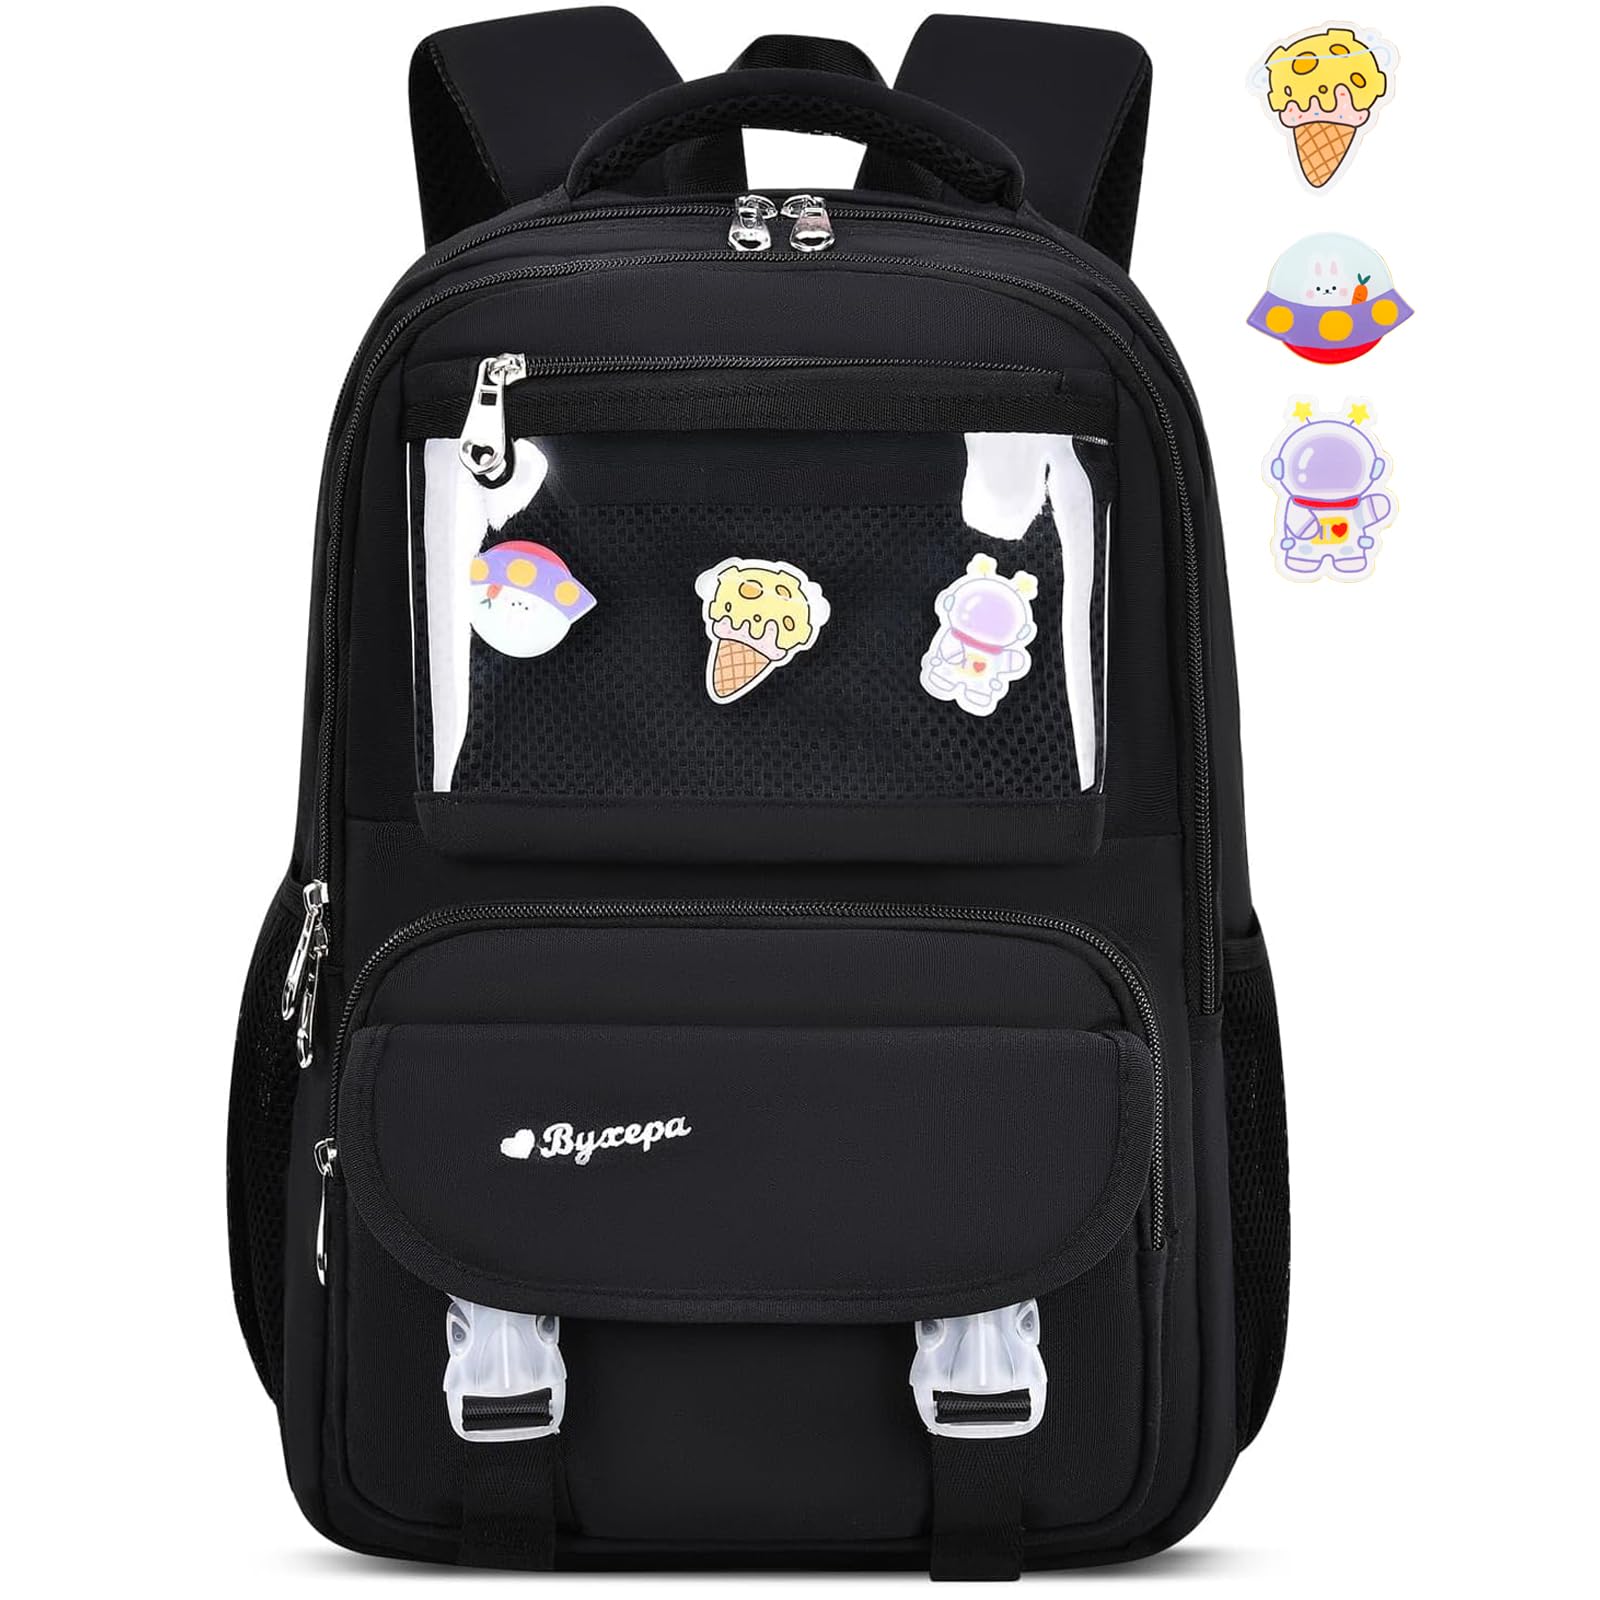 Girls Backpack, Kawaii Kids School Backpacks with Cute Pin Accessories for Girls, Cute Book Bag with Compartments for Teen Girl Kid Students Elementary Middle School, Kids' School Bag, 16in(Black)